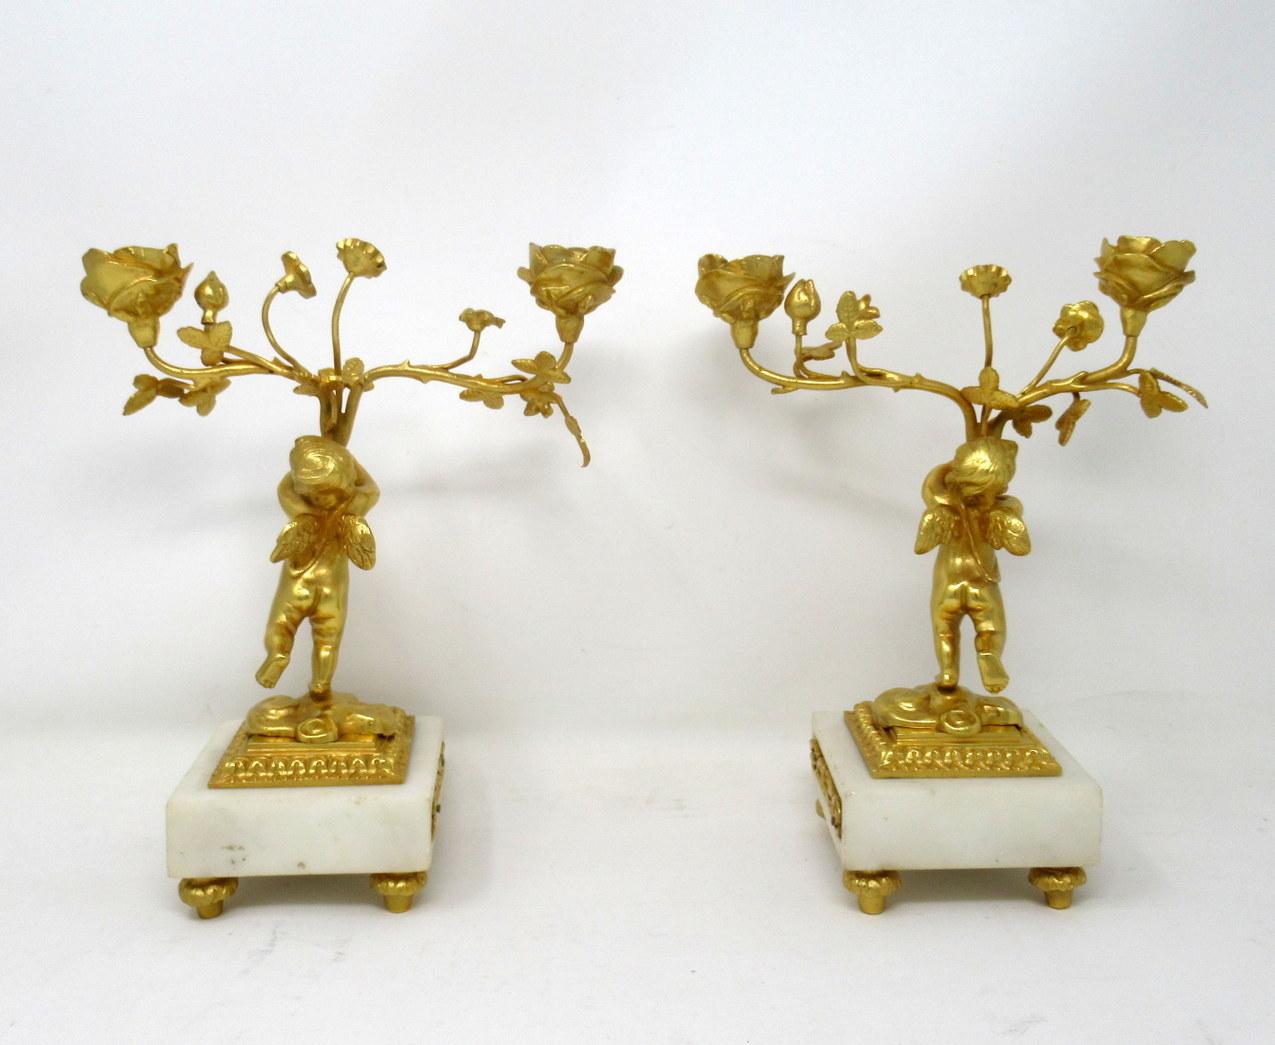 A fine pair of stylish and imposing French ormolu and cream statutory marble twin light table or mantle candelabra of outstanding quality, mid-late 19th century. 

Each with a central standing ormolu solid bronze Cherub holding a loft a two branch